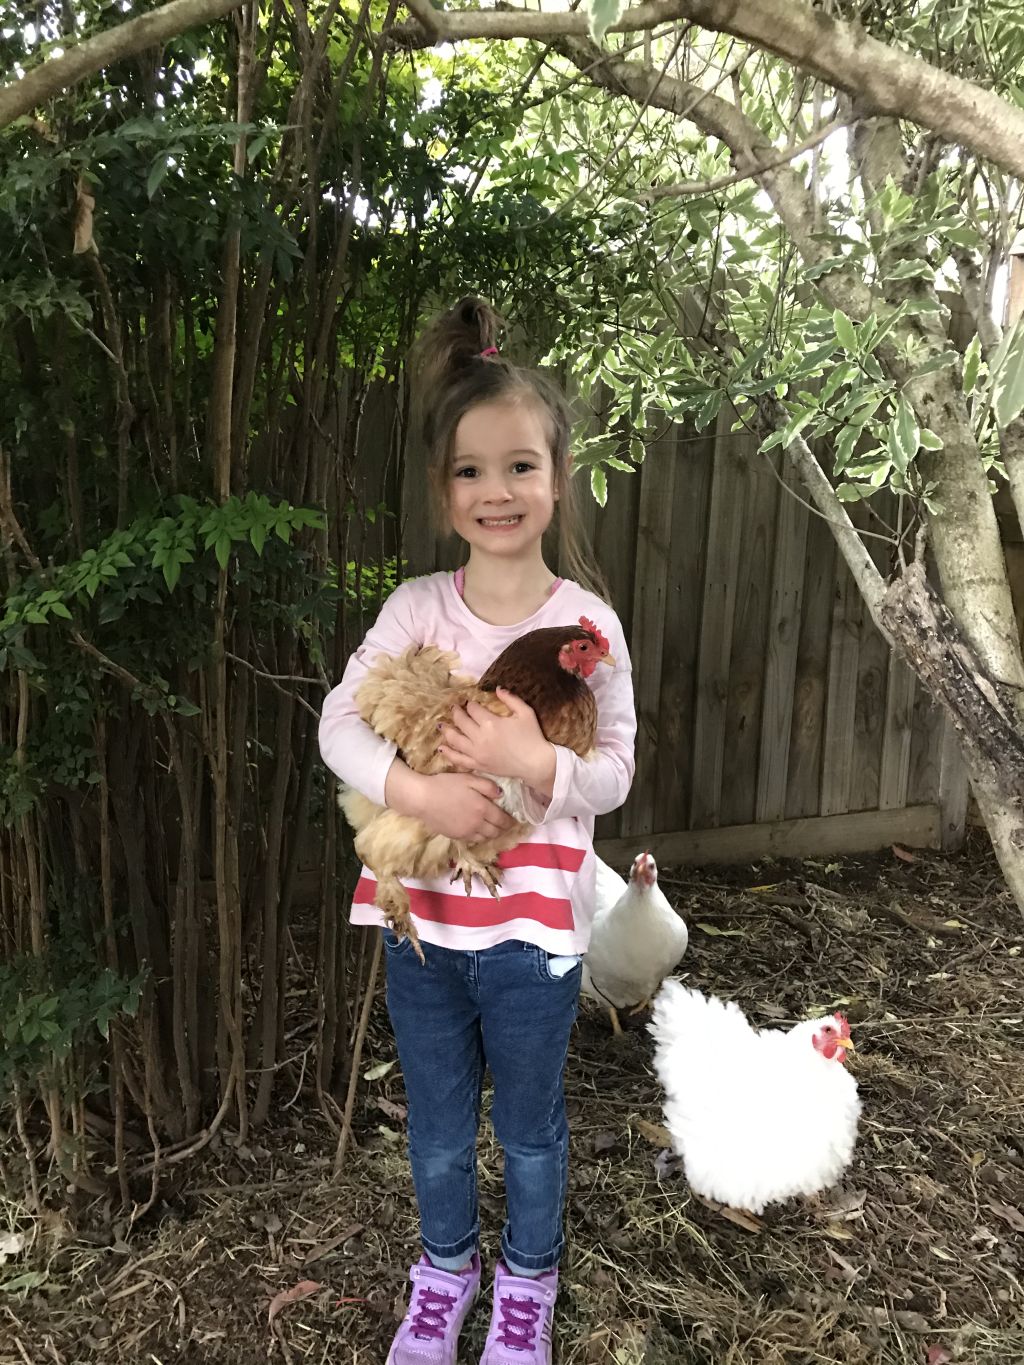 Chloe Hyder, 5, with her chickens Betsy and Sadie at home in Lara, Victoria. Photo: Supplied